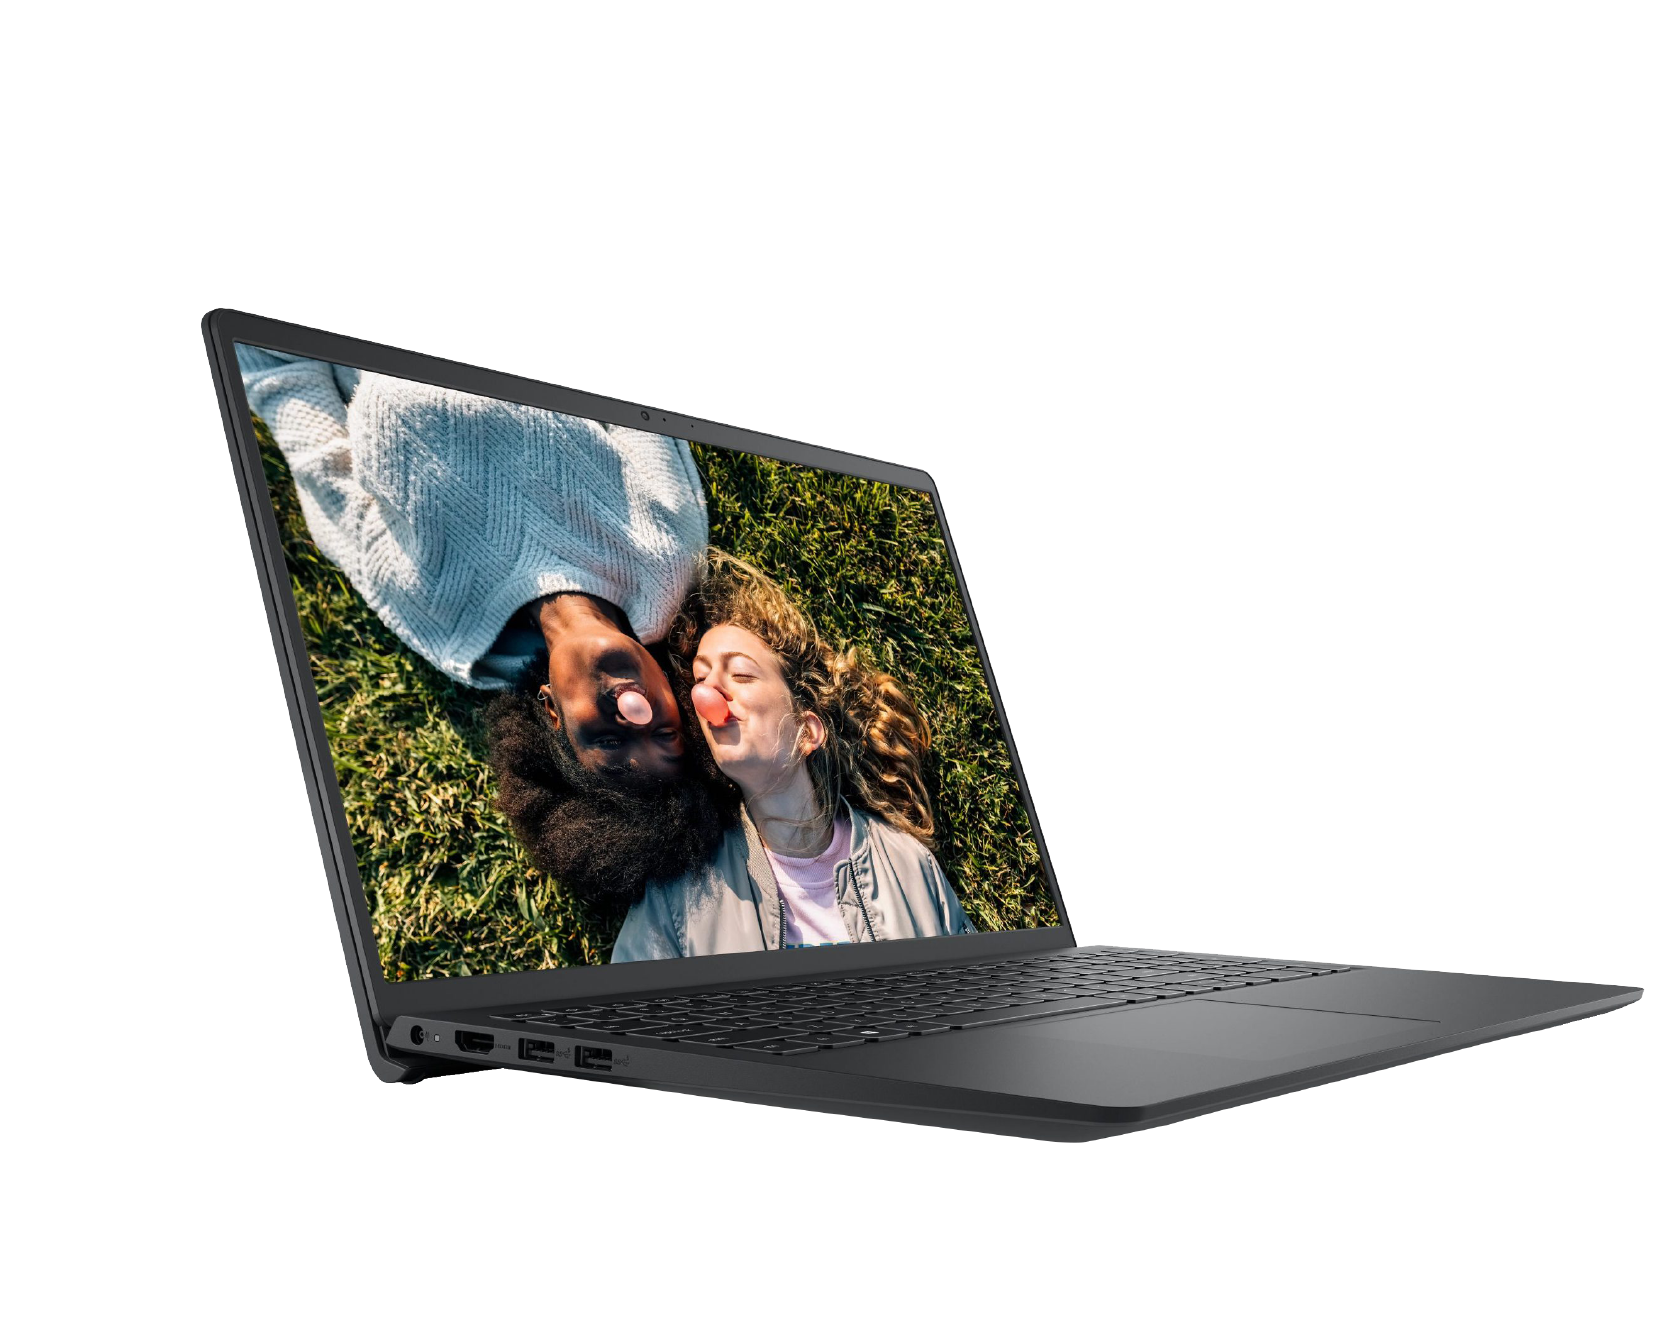 DELL INSPIRON 3511 NB-IN3511-I31115G4-4 (15.6-inch FHD NT | i3